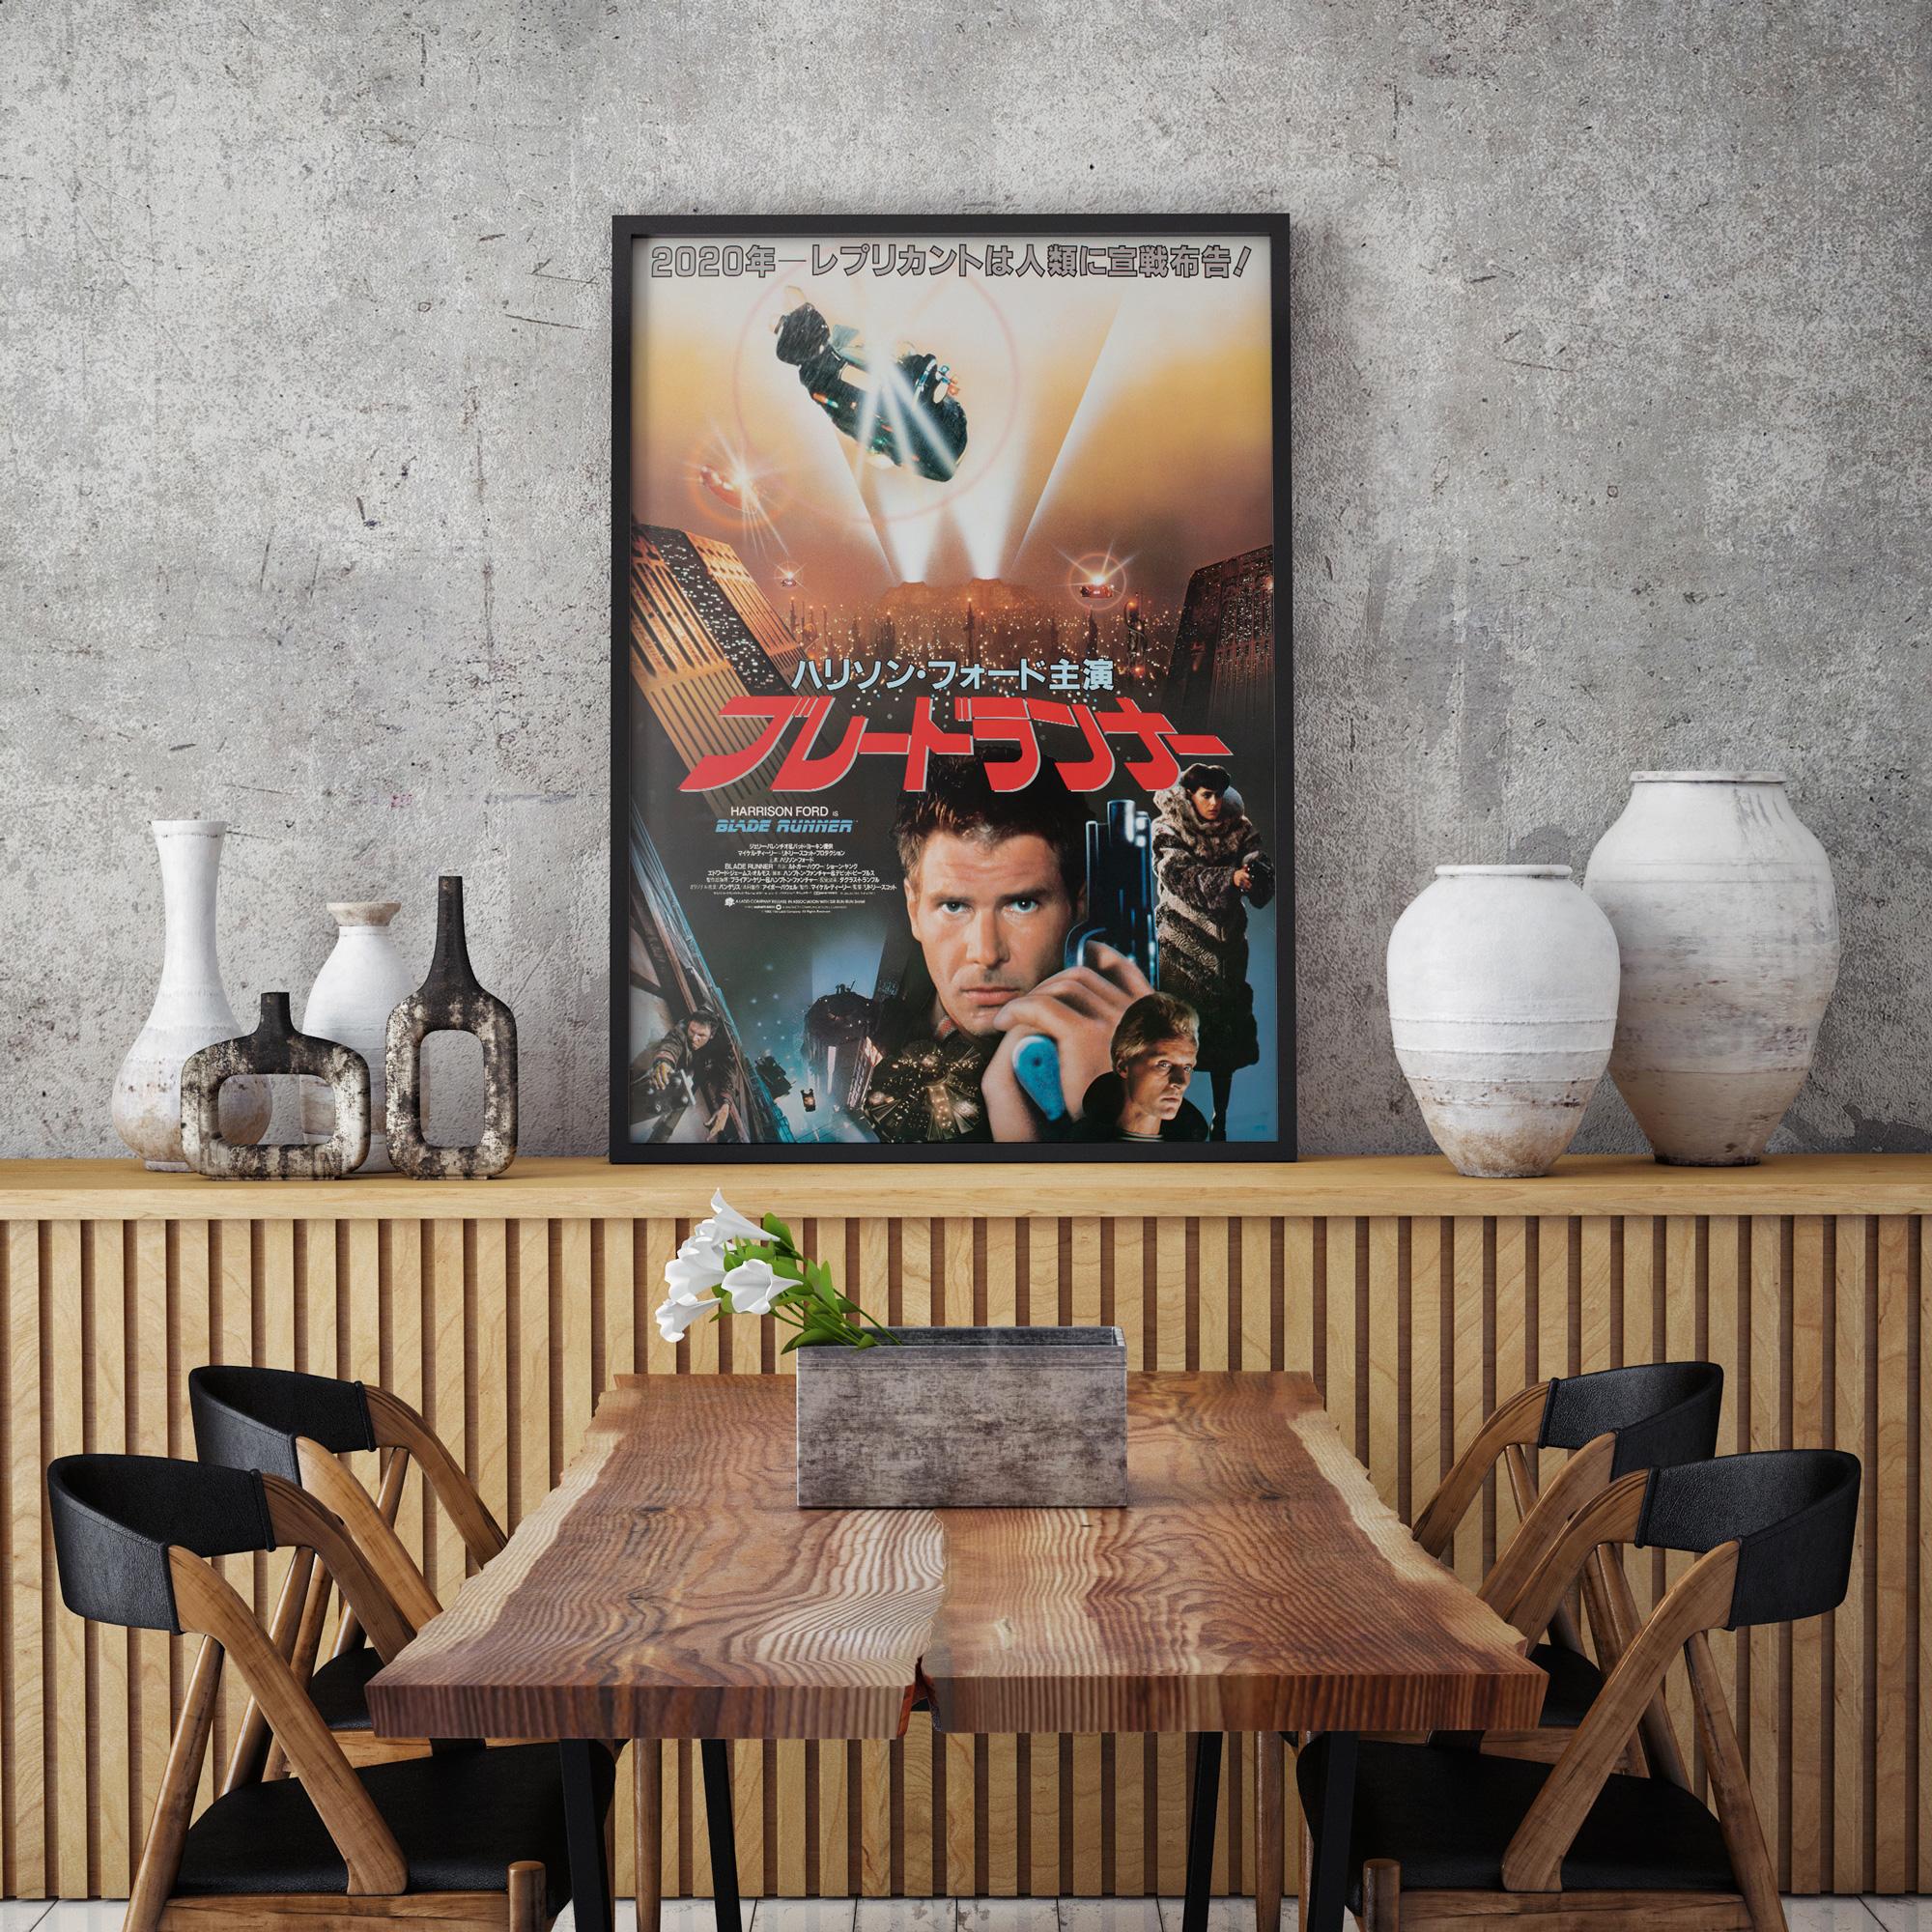 The original first-year-of-release Japanese film poster for Ridley Scott's 80s seminal sci-fi Blade Runner.

This vintage movie poster is sized 20 1/4 x 28 3/4 inches and will be sent rolled (unframed).

Year 1982
Poster Type JPN B2
Style